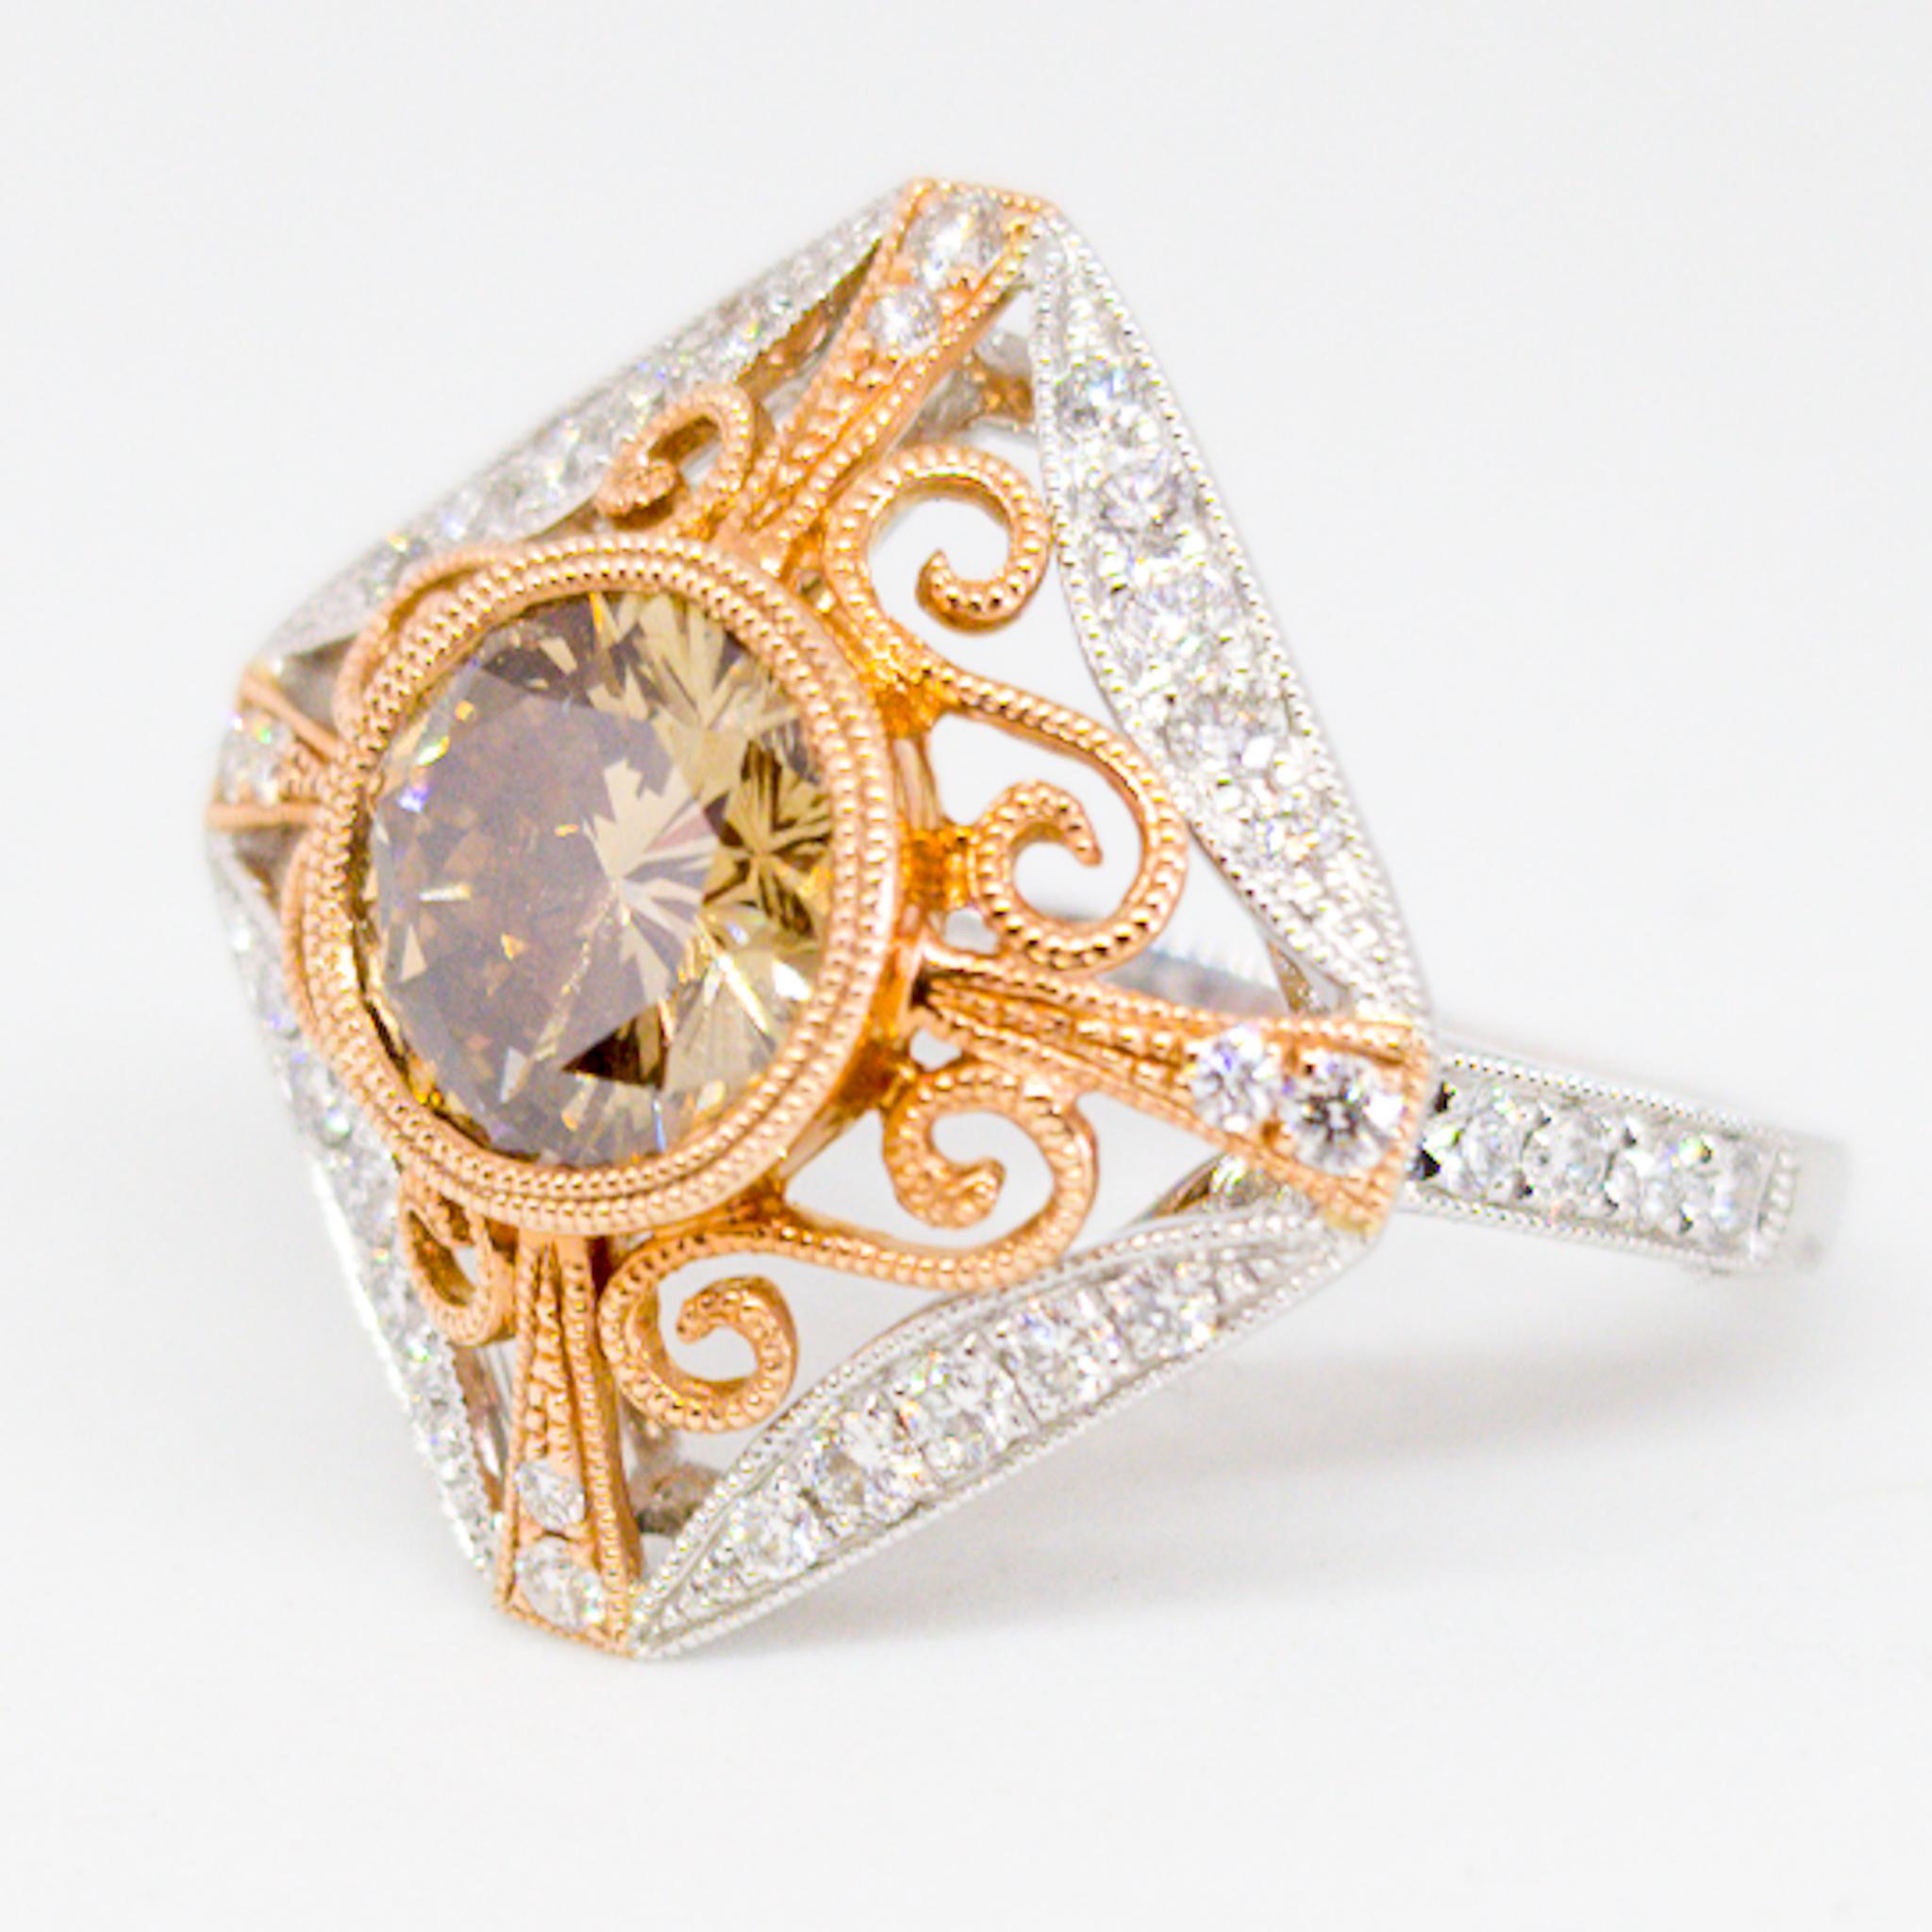 Natural Fancy Champagne Diamond Ring 2.26 Carat Filigree White and Rose Gold For Sale 3